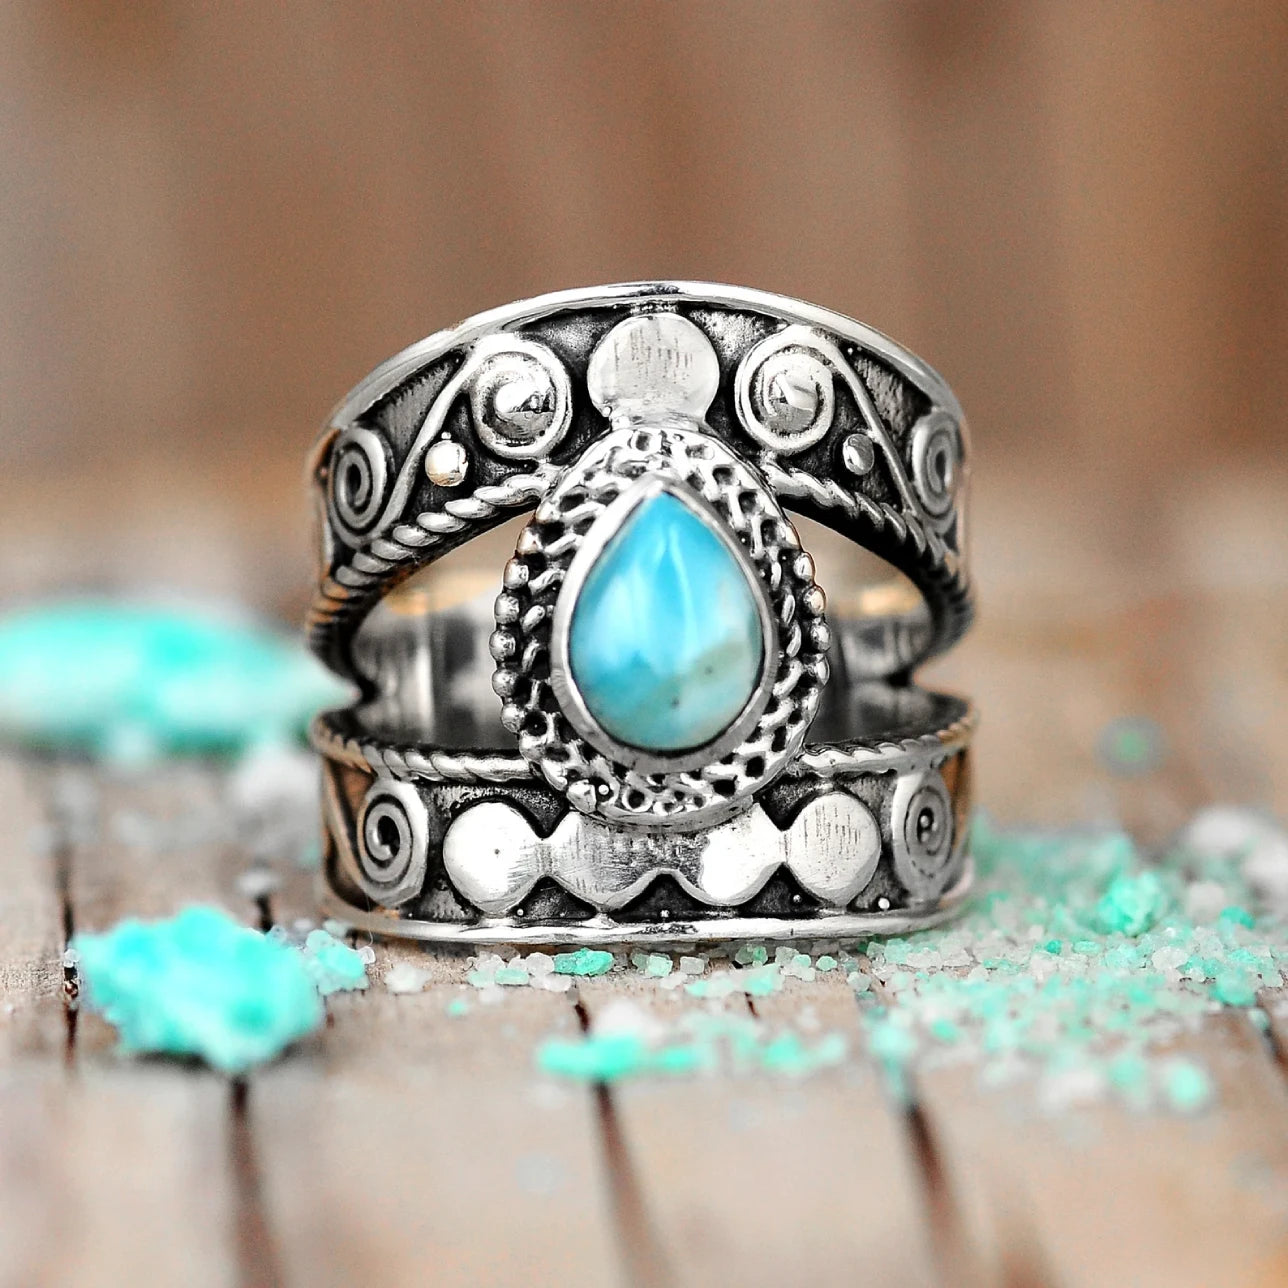 Larimar meaning: What is larimar and its healing properties? Rosery Poetry